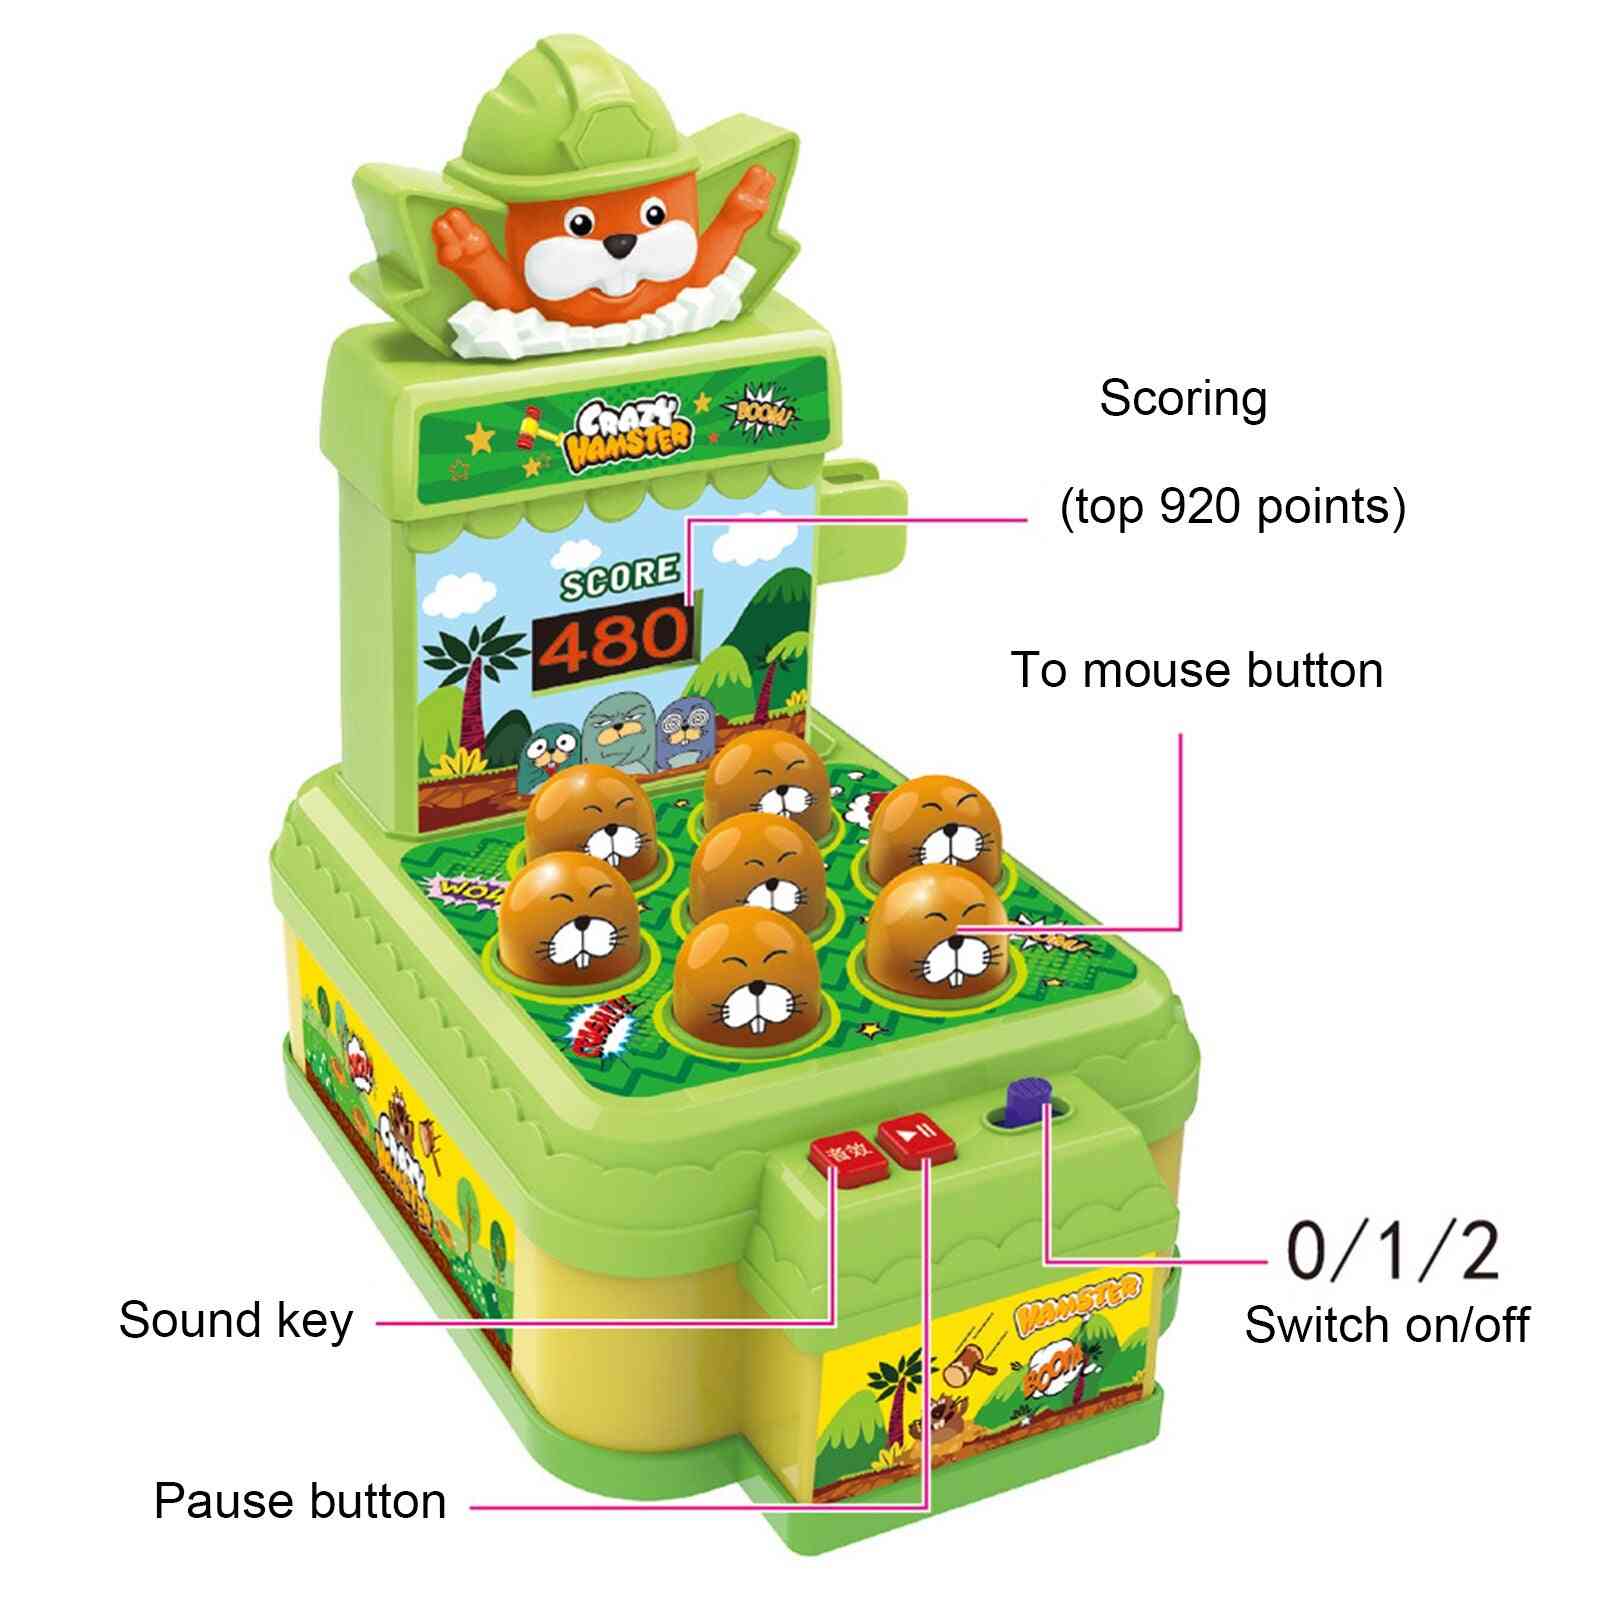 A Mole Game Interactive Pounding With Lights Sounds Pick Up Small Hammer Hitting Toy Educational Hand Exercise